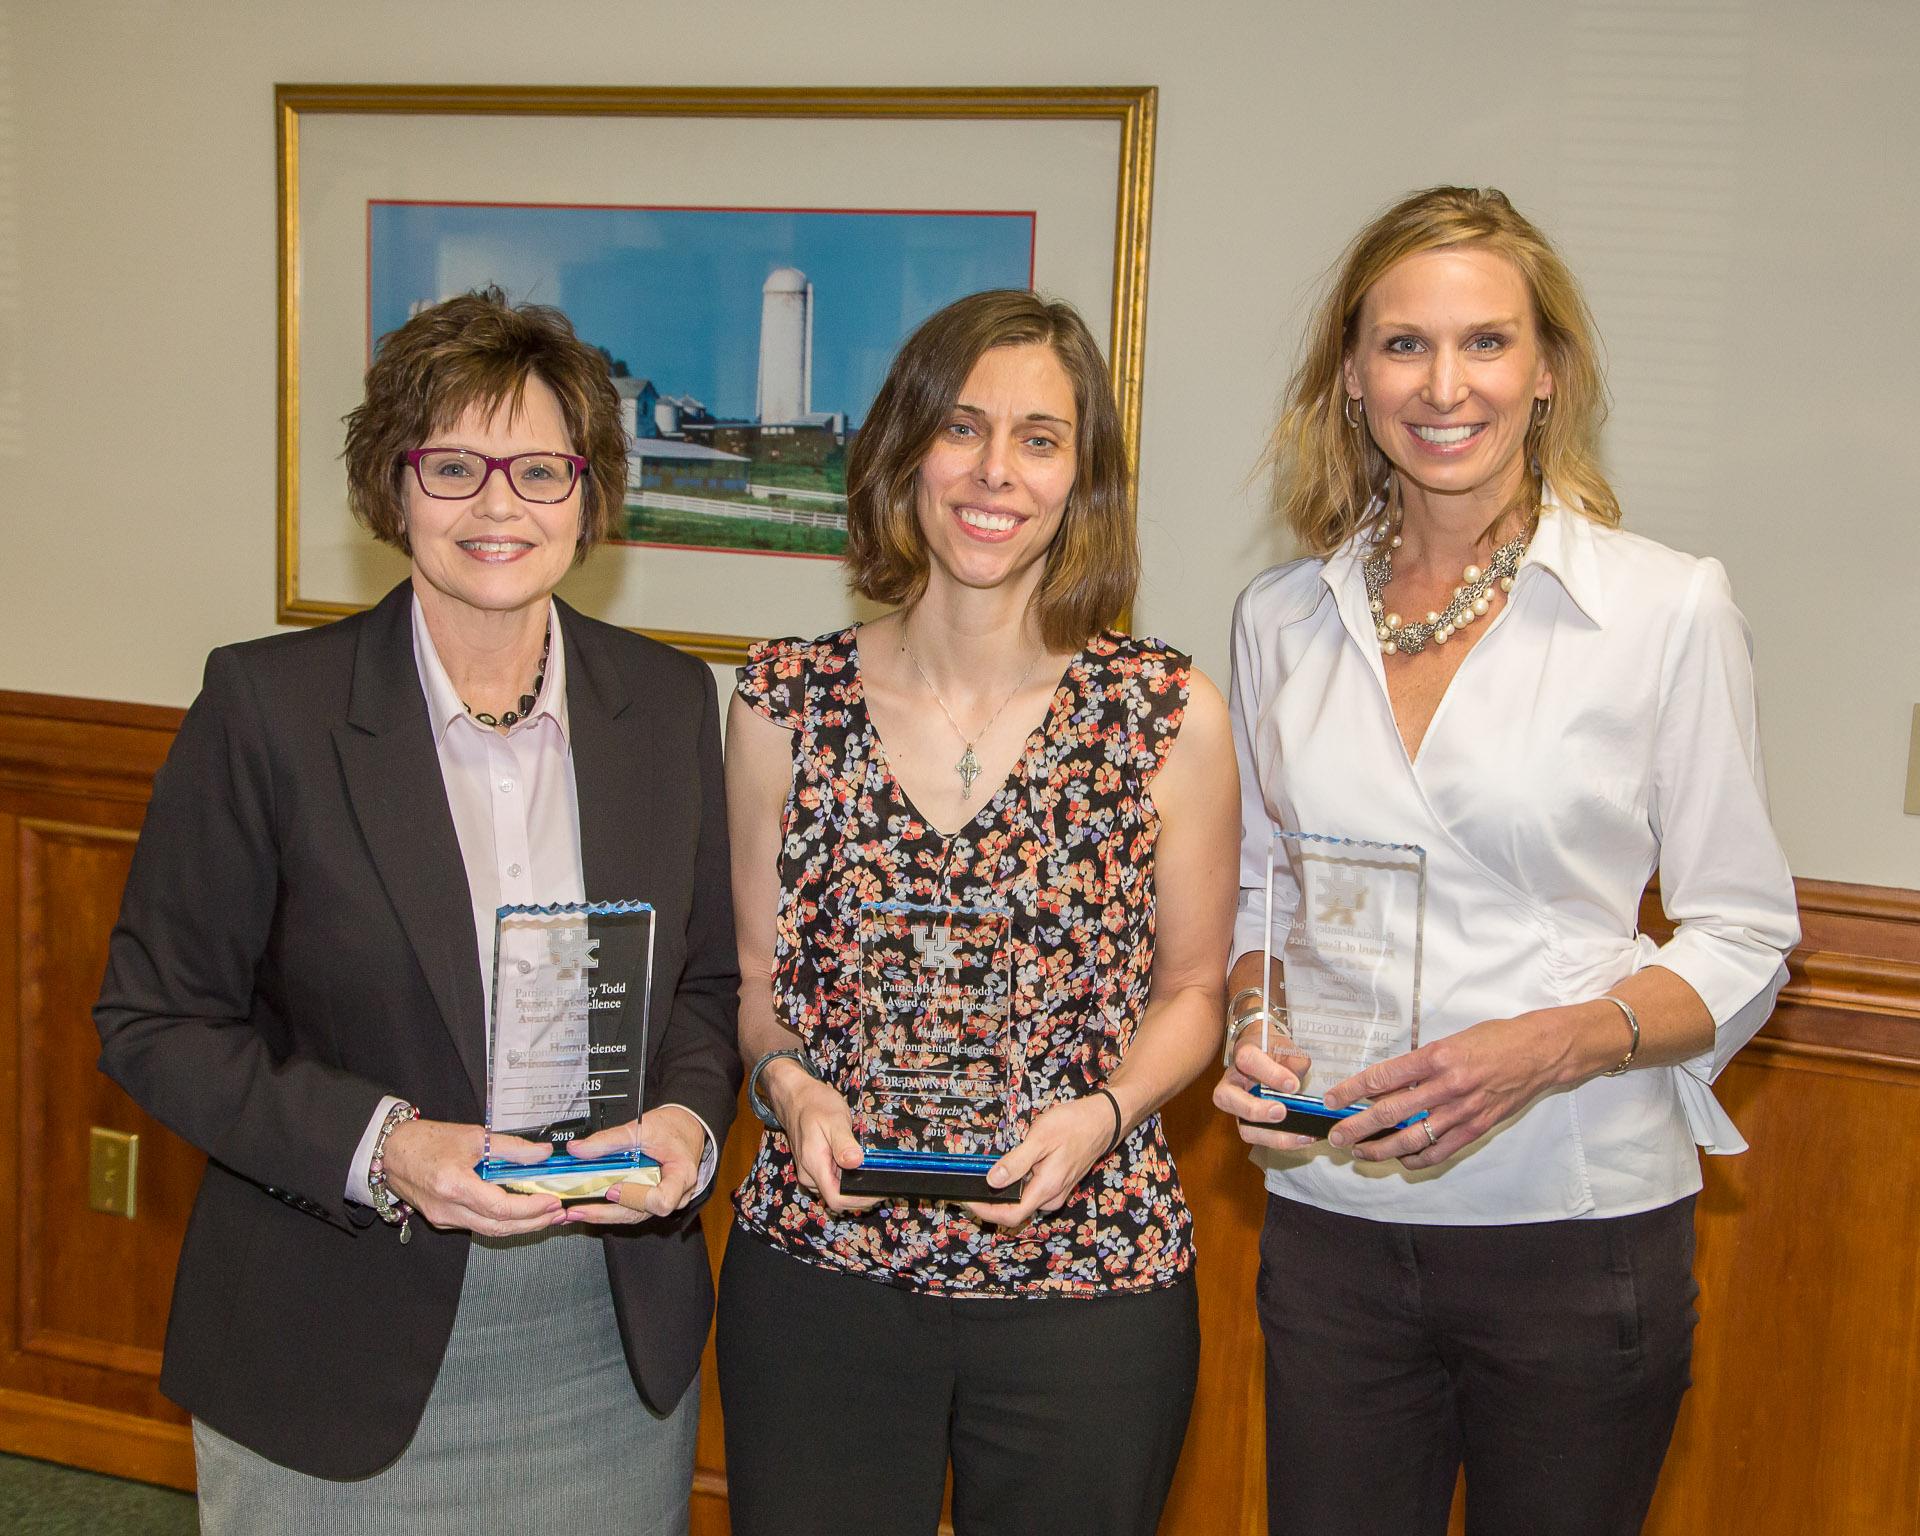 From left: Jill Harris, Dawn Brewer and Amy Kostelic received the 2019 Patricia Brantley Todd Awards of Excellence from the UK School of Human Environmental Sciences. Photo by Steve Patton, UK agricultural communications.